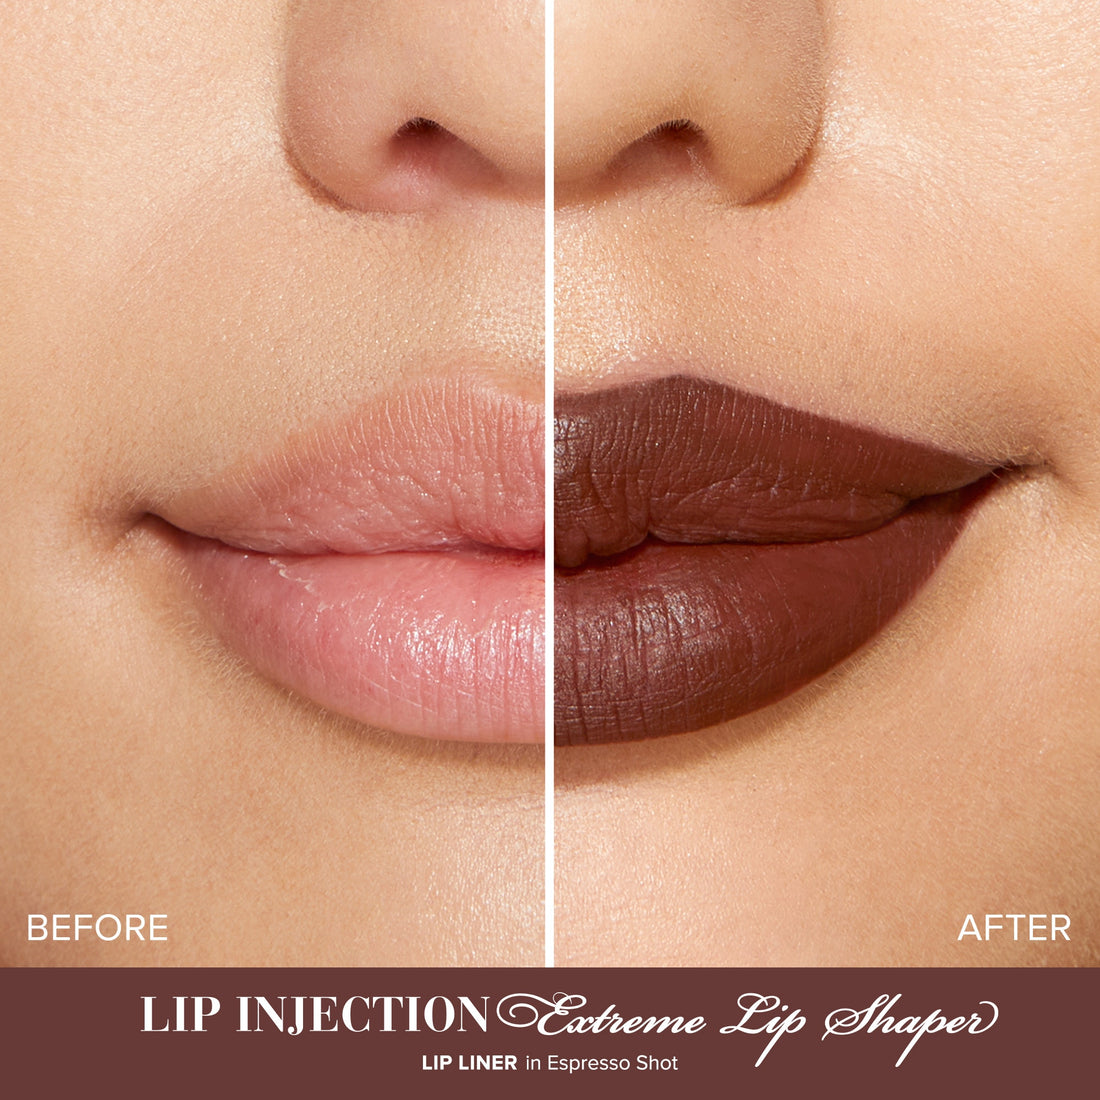 Lip Injection Extreme Lip Shaper/ Espresso Shot   - Too Faced.